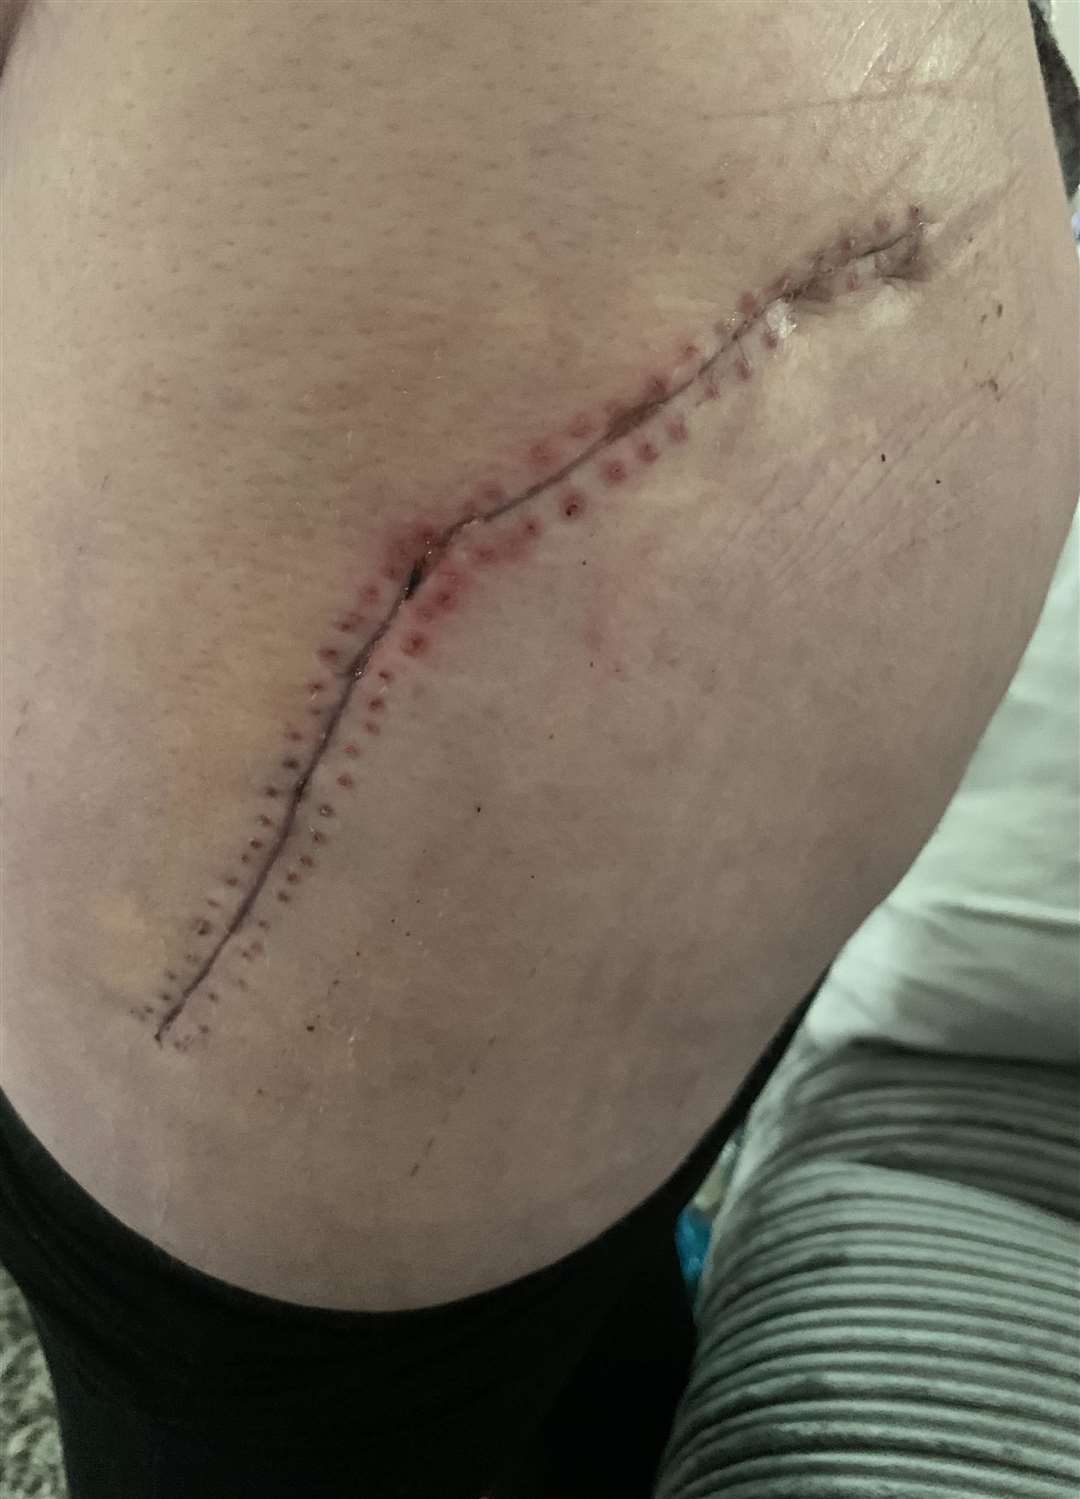 Denise's scar following her hip replacement